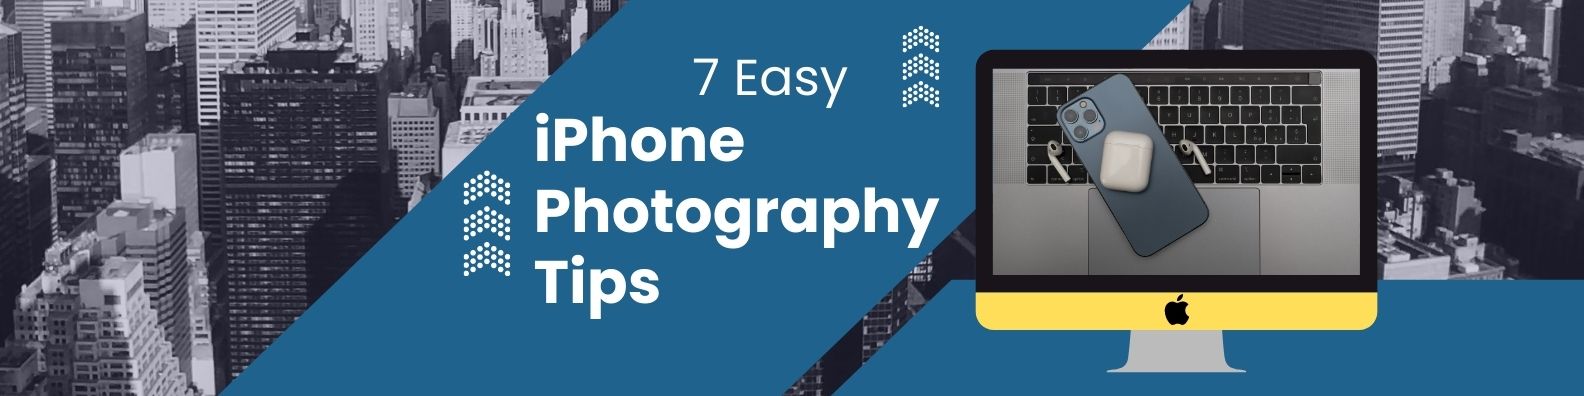 7 Easy iPhone Photography Tips